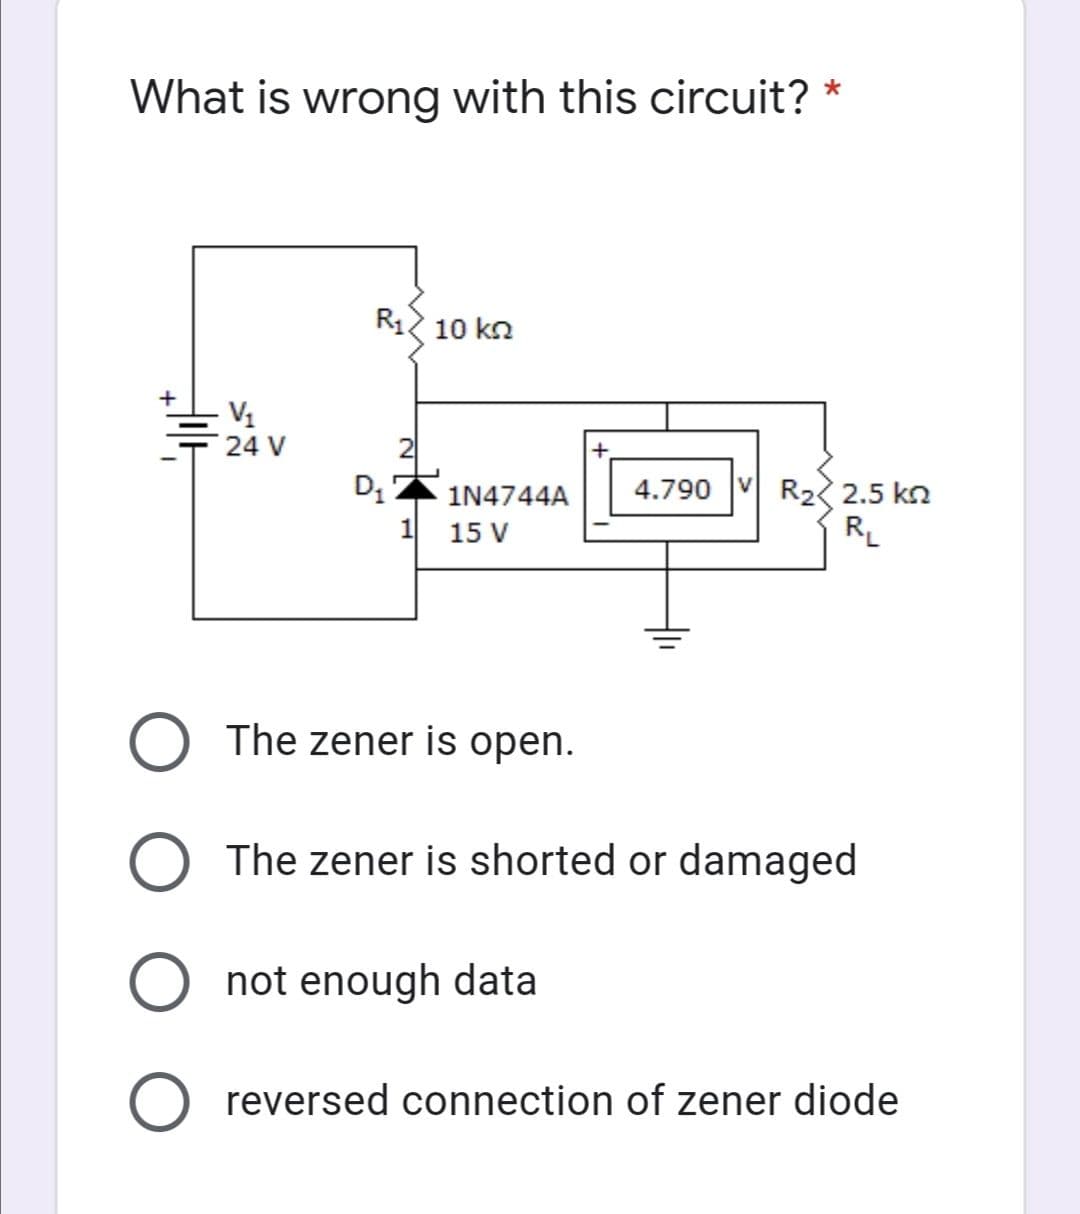 What is wrong with this circuit? *
R12 10 kn
+
V1
24 V
D, 2
4.790 V R2 2.5 kn
RL
1N4744A
1
15 V
The zener is open.
O The zener is shorted or damaged
O not enough data
O reversed connection of zener diode
1.
